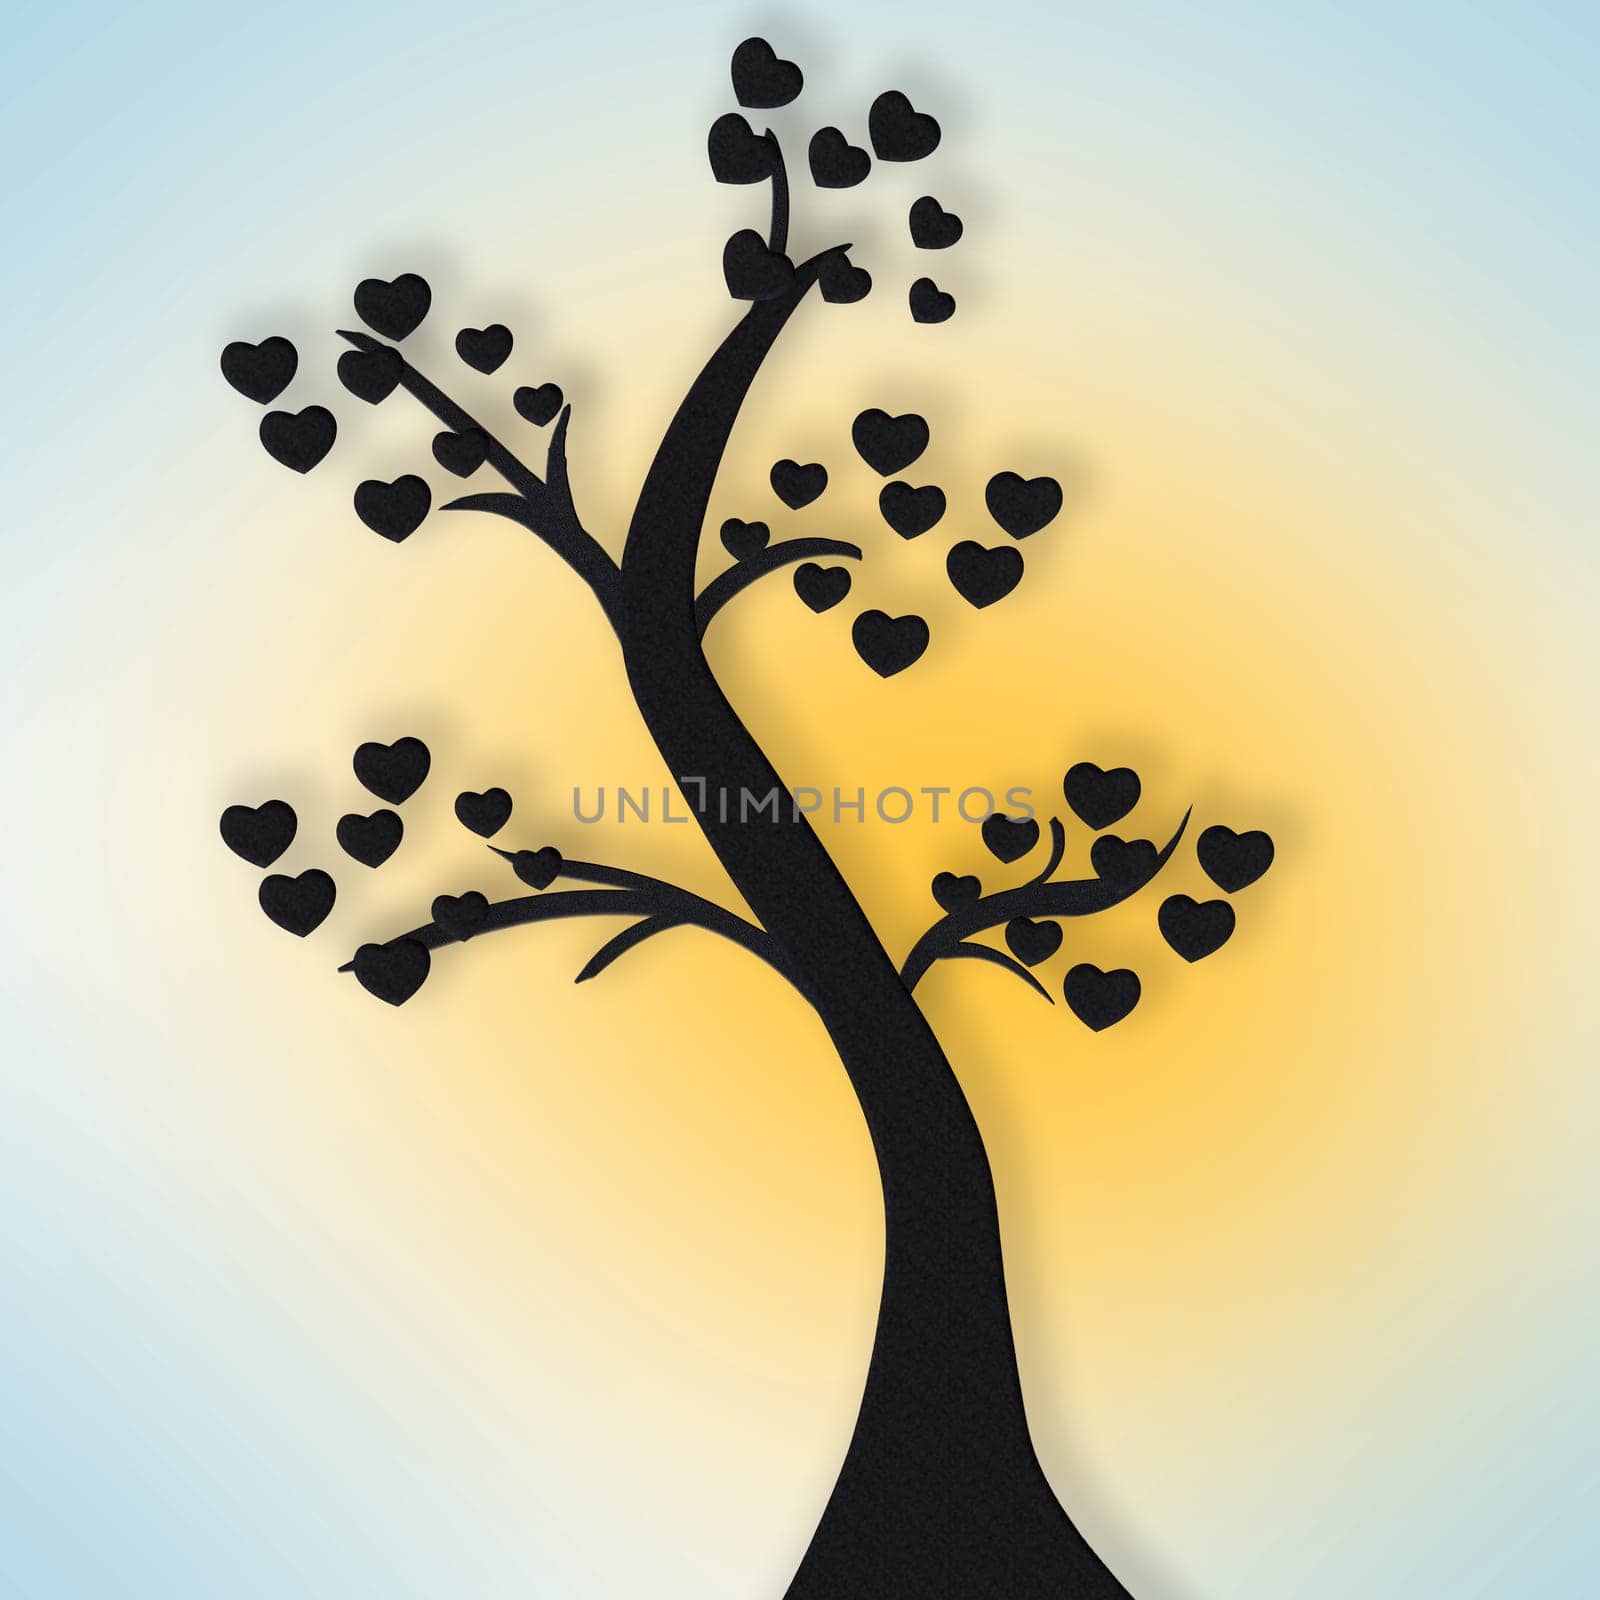 Cartoon, tree and graphic of hearts for love for support, valentines day and mockup space in studio. Blue background, icons or illustration of a creative wallpaper for care, nature design or romance by YuriArcurs